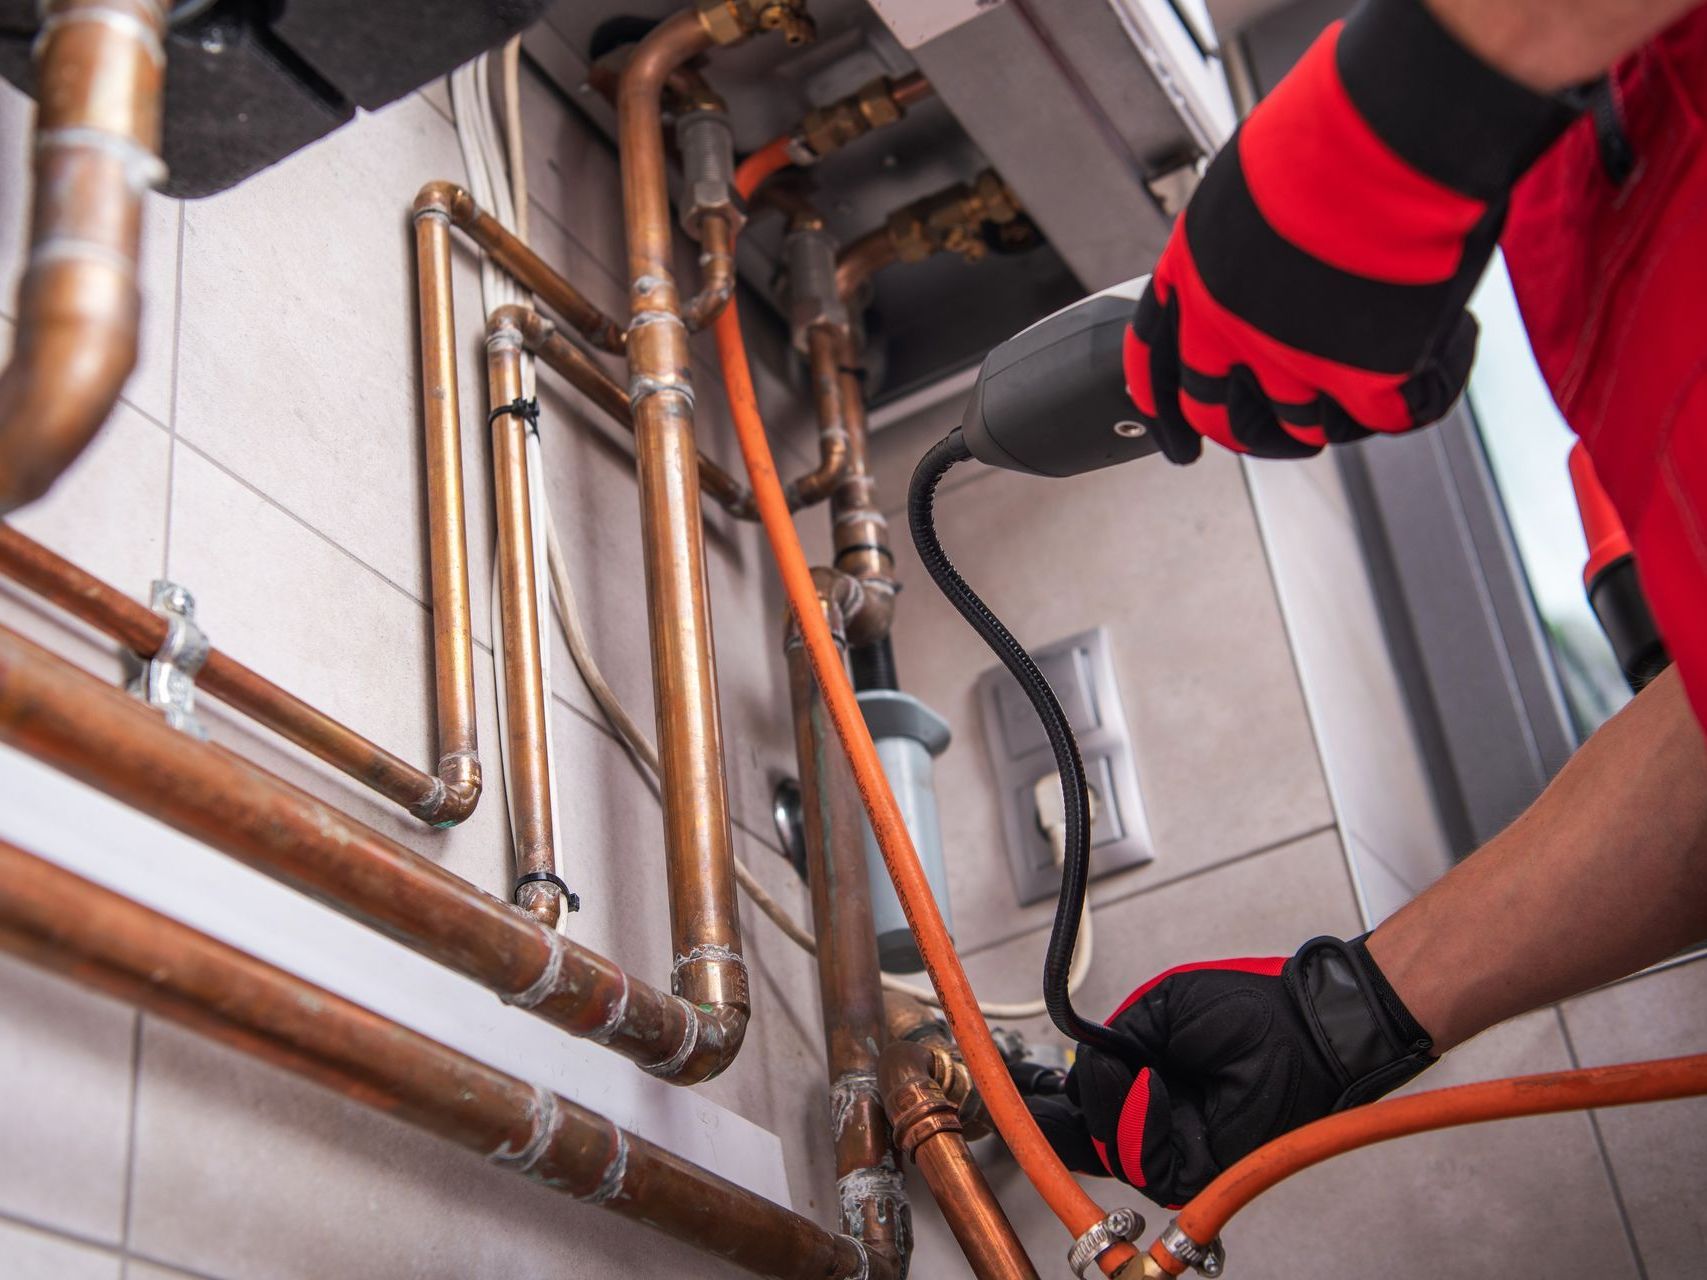 HVAC technician repairing residential heating and cooling unit